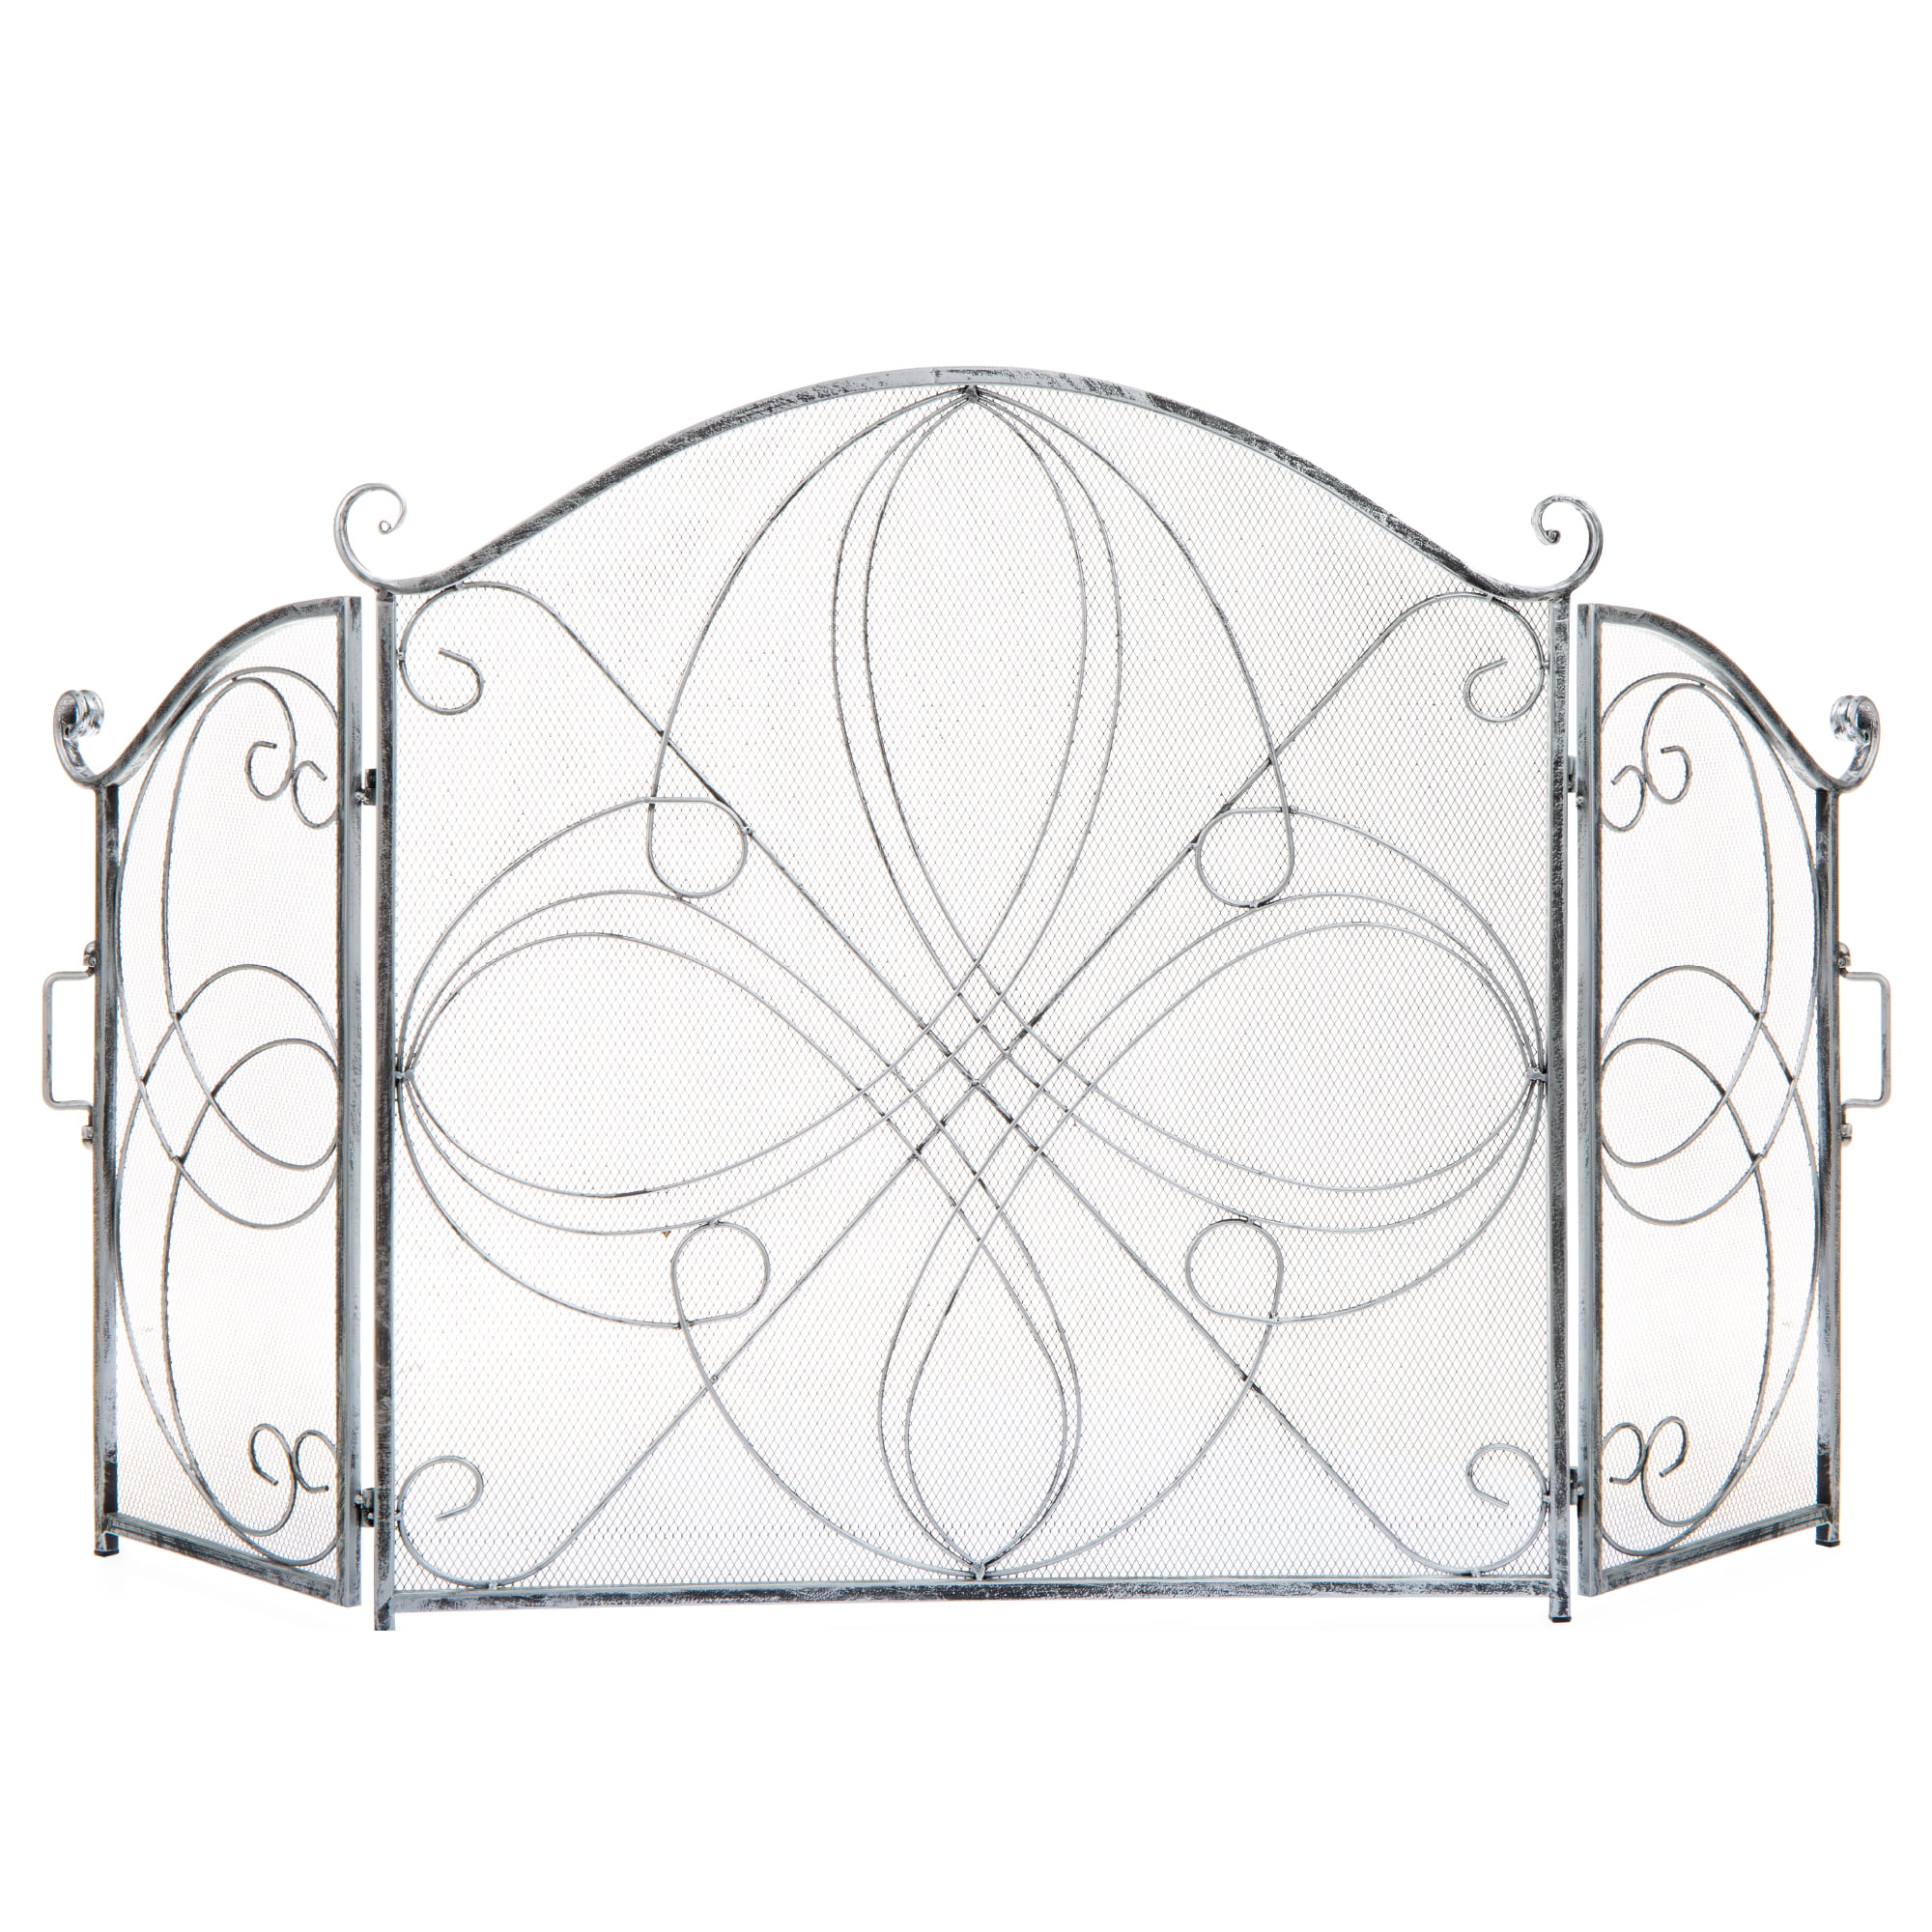 Fire Screen Black Folding 3 Panel Guard Sparkguard Cover New By Home Discount 